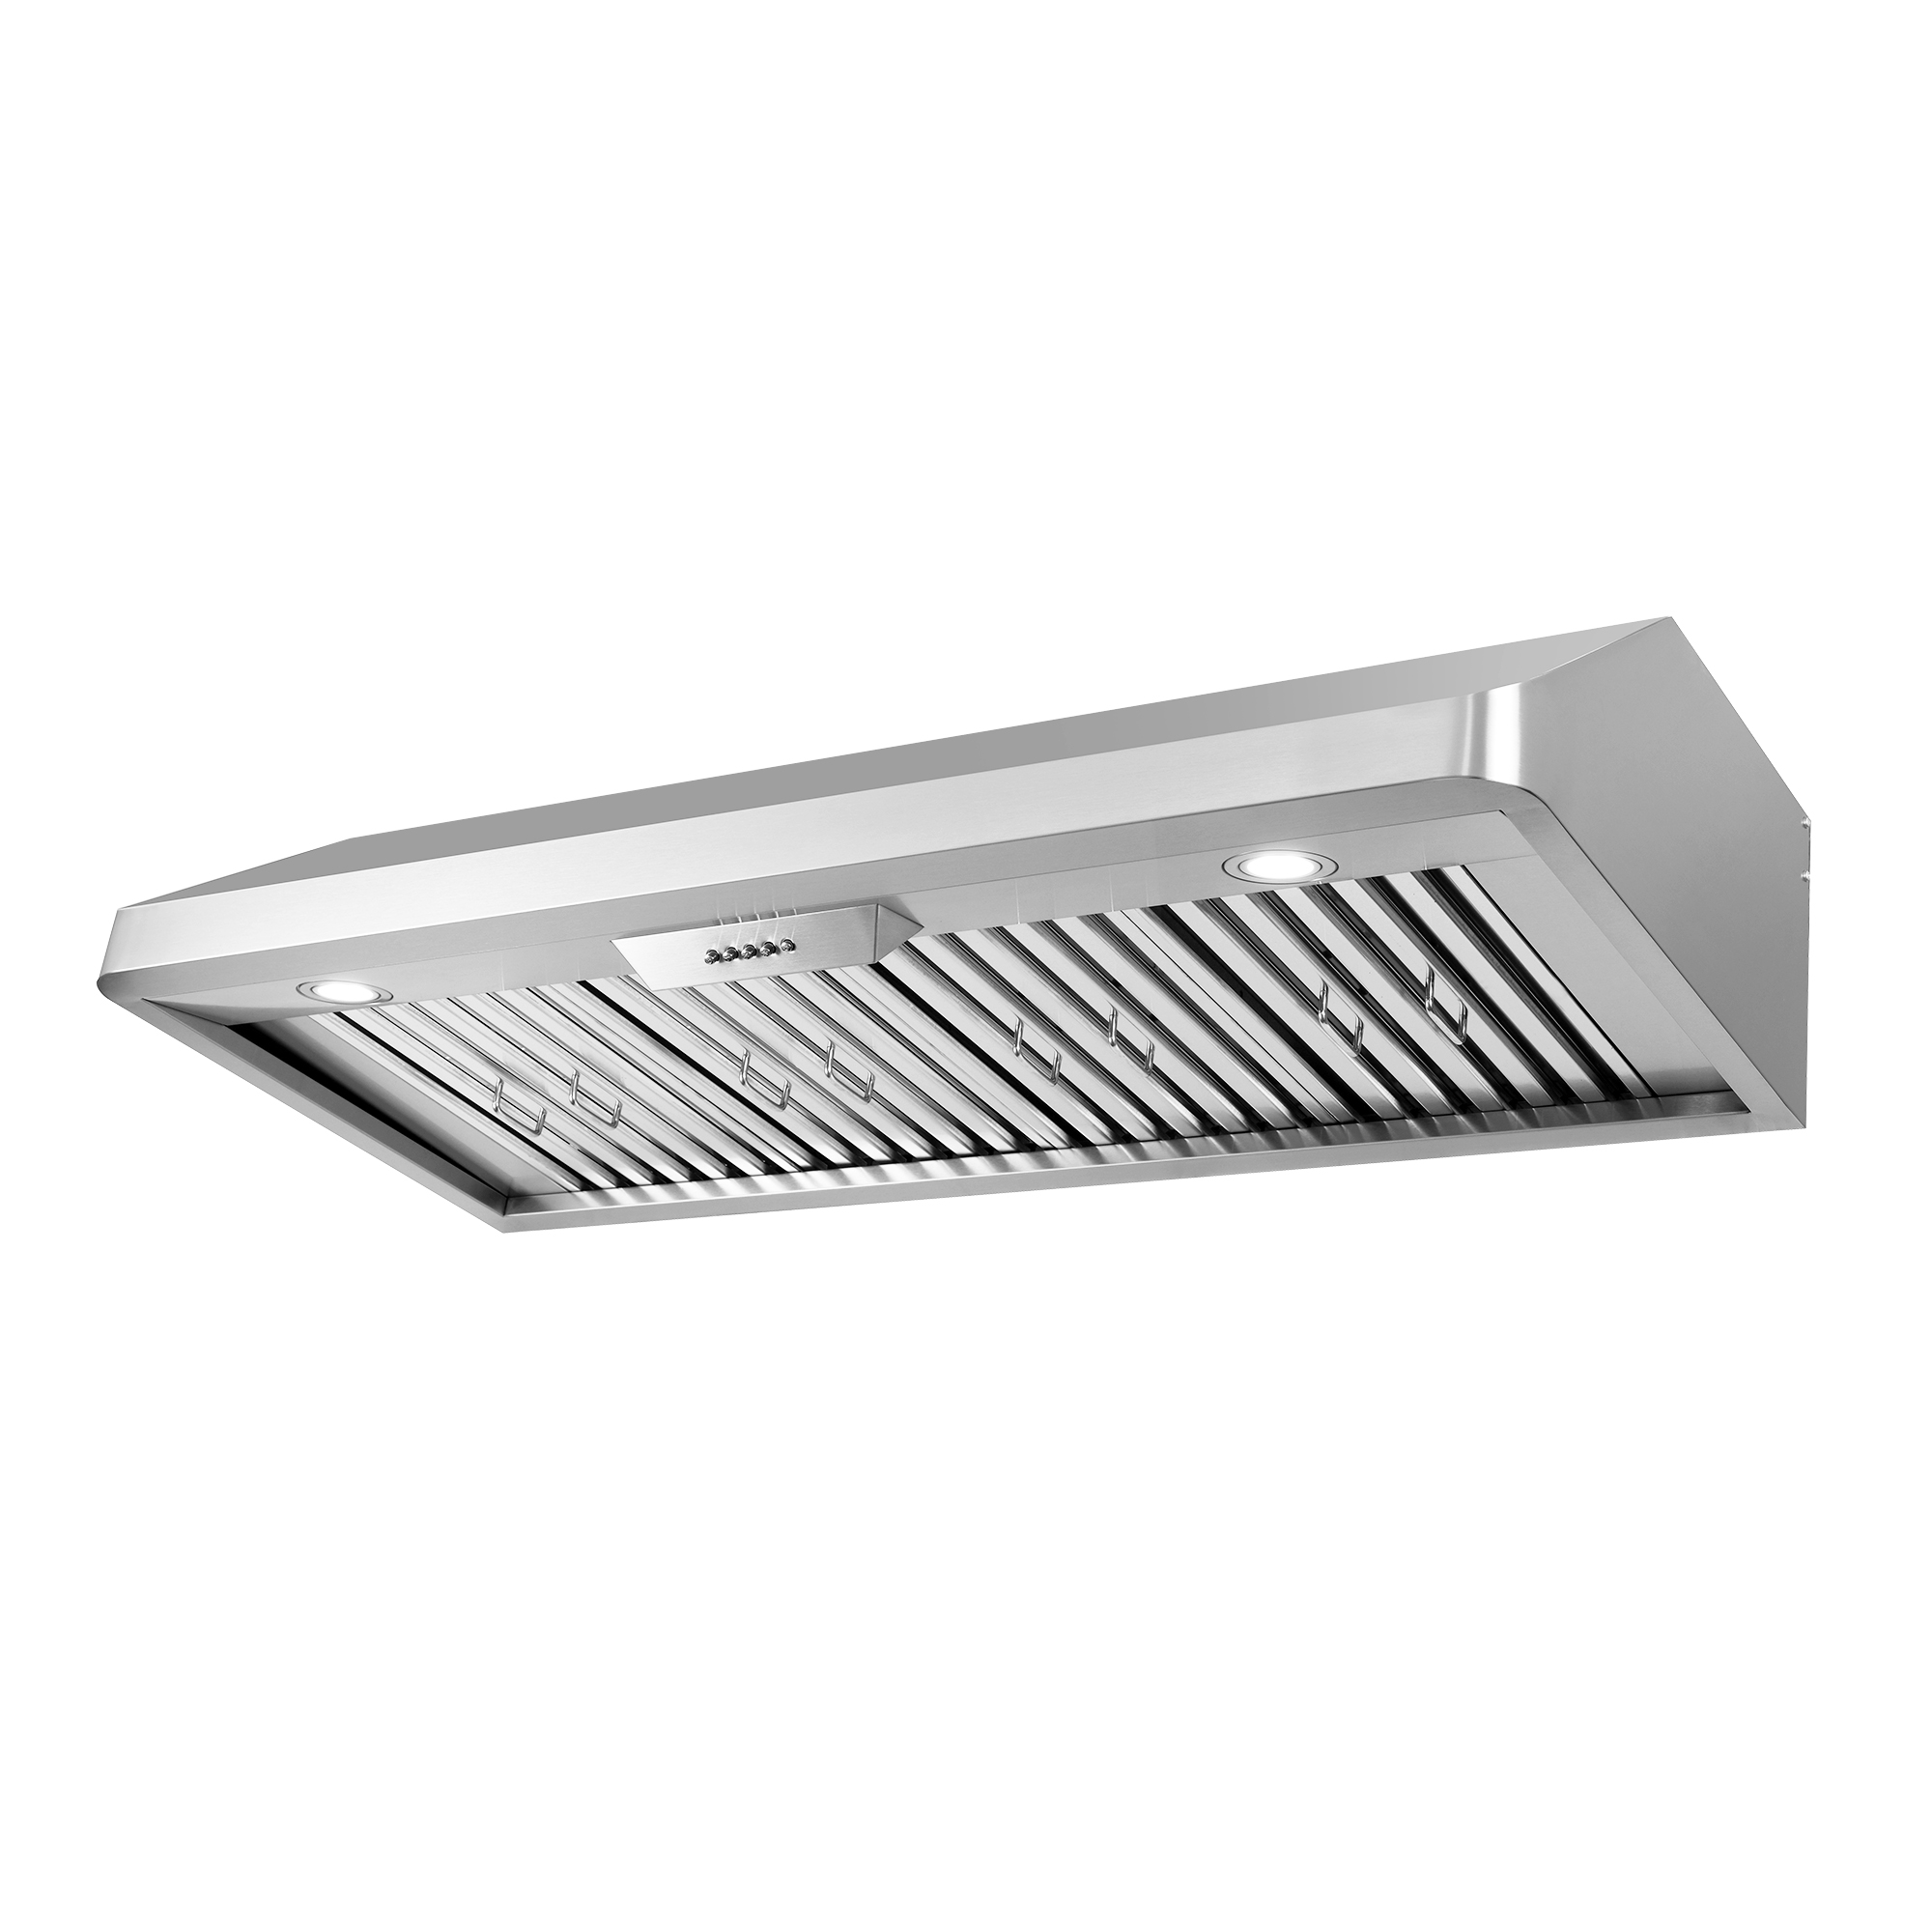 Cosmo 48 in. Convertible Under Cabinet Range Hood in Stainless Steel with Push Button Control, LED Light and Permanent Filters